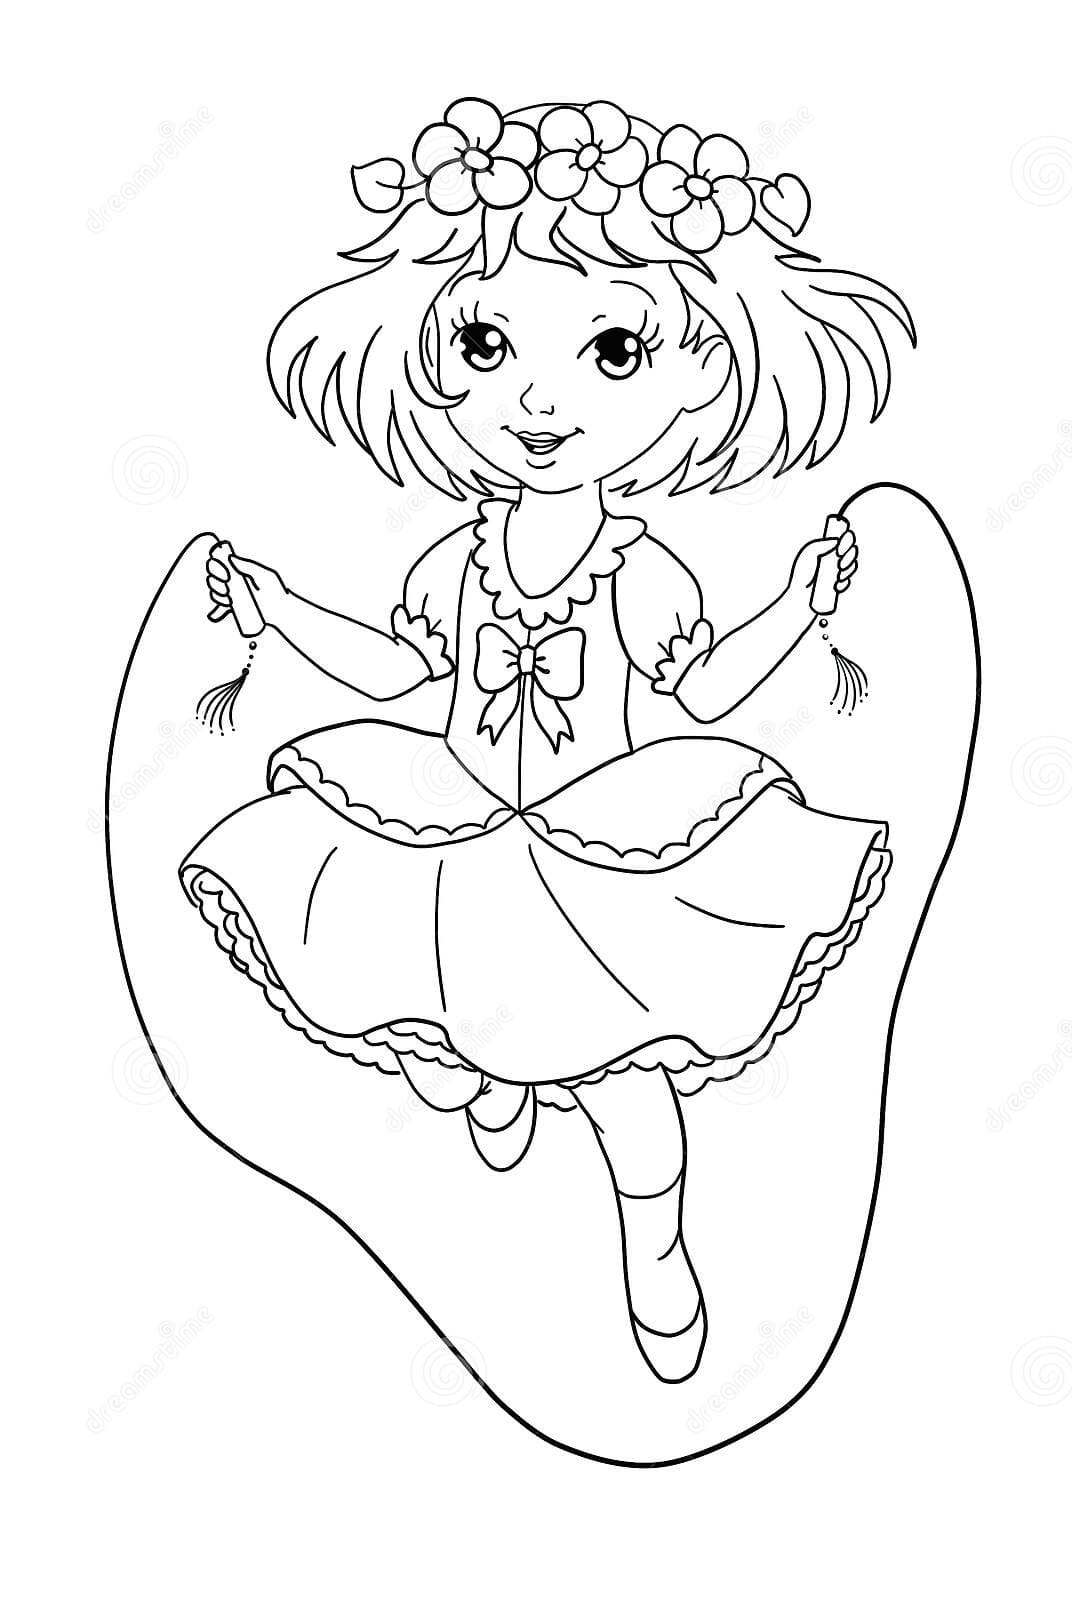 Illustration With Cute Little Princess Playing With The Skipping Rope